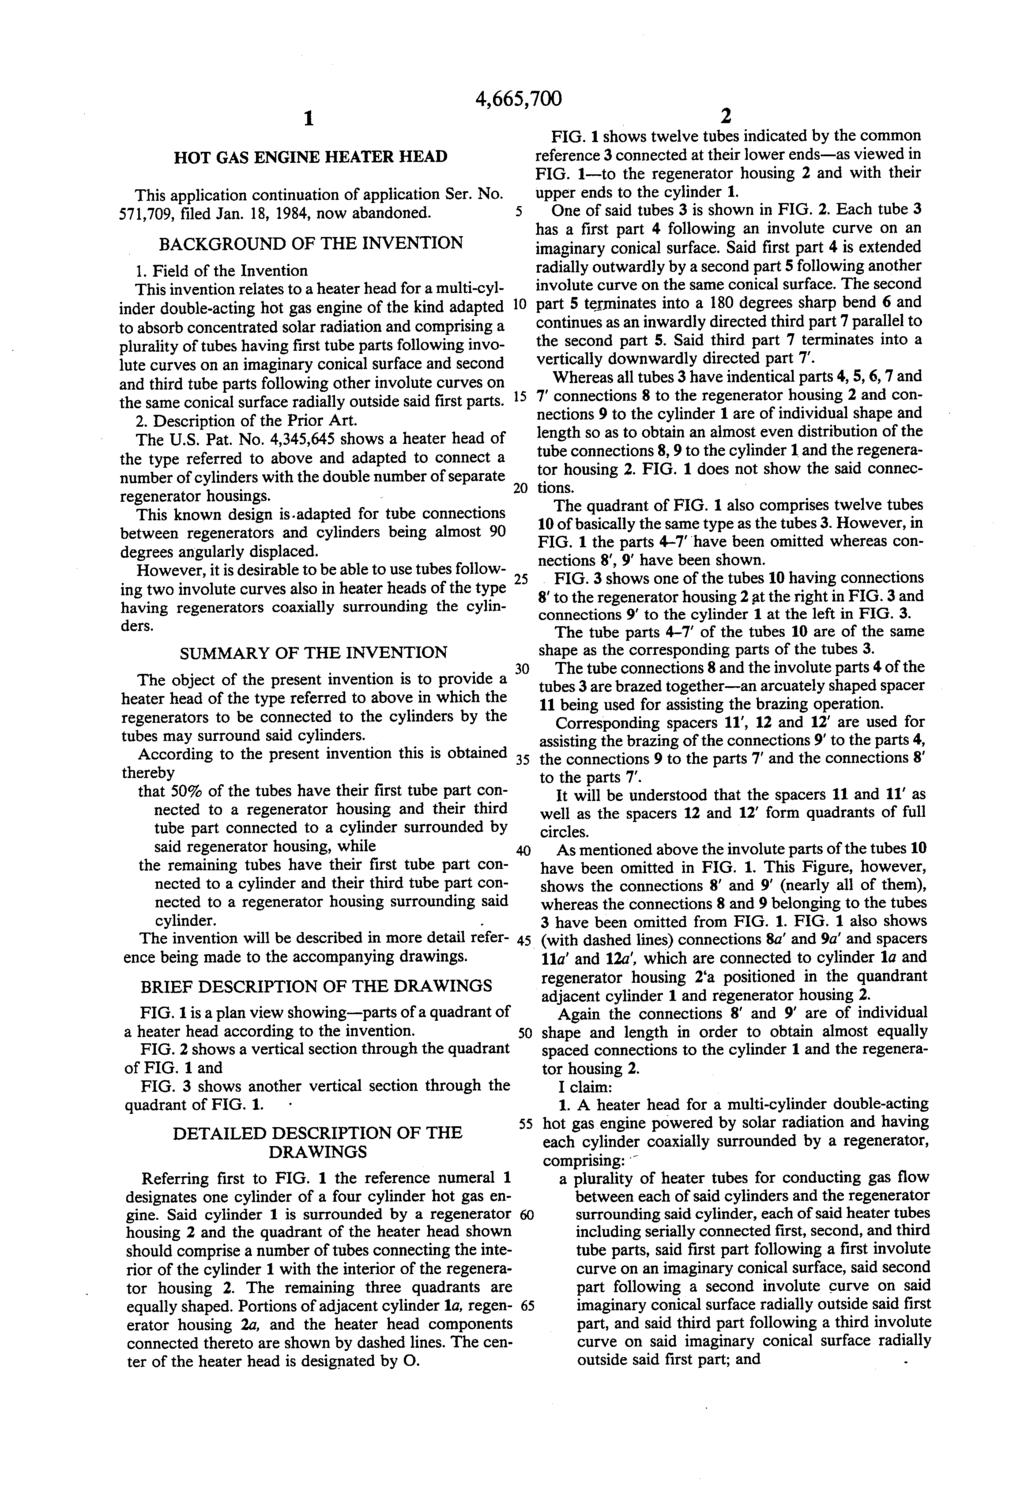 1. HOT GAS ENGINE HEATER HEAD This application continuation of application Ser. No. 571,709, filed Jan. 18, 1984, now abandoned. BACKGROUND OF THE INVENTION 1.